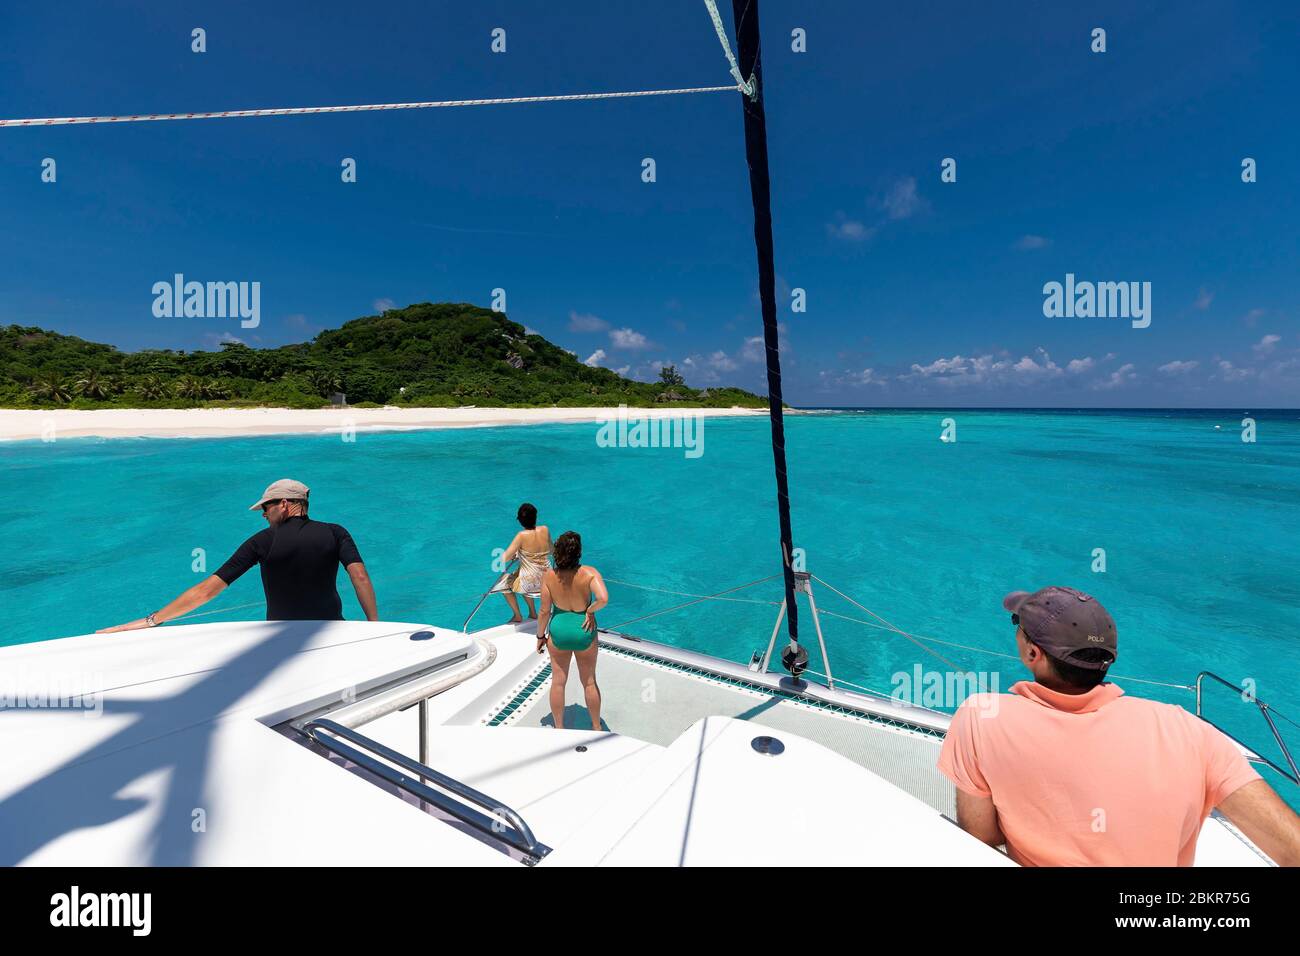 Seychelles, Cousine Island, crew aboard a boat at anchor on turquoise water Stock Photo